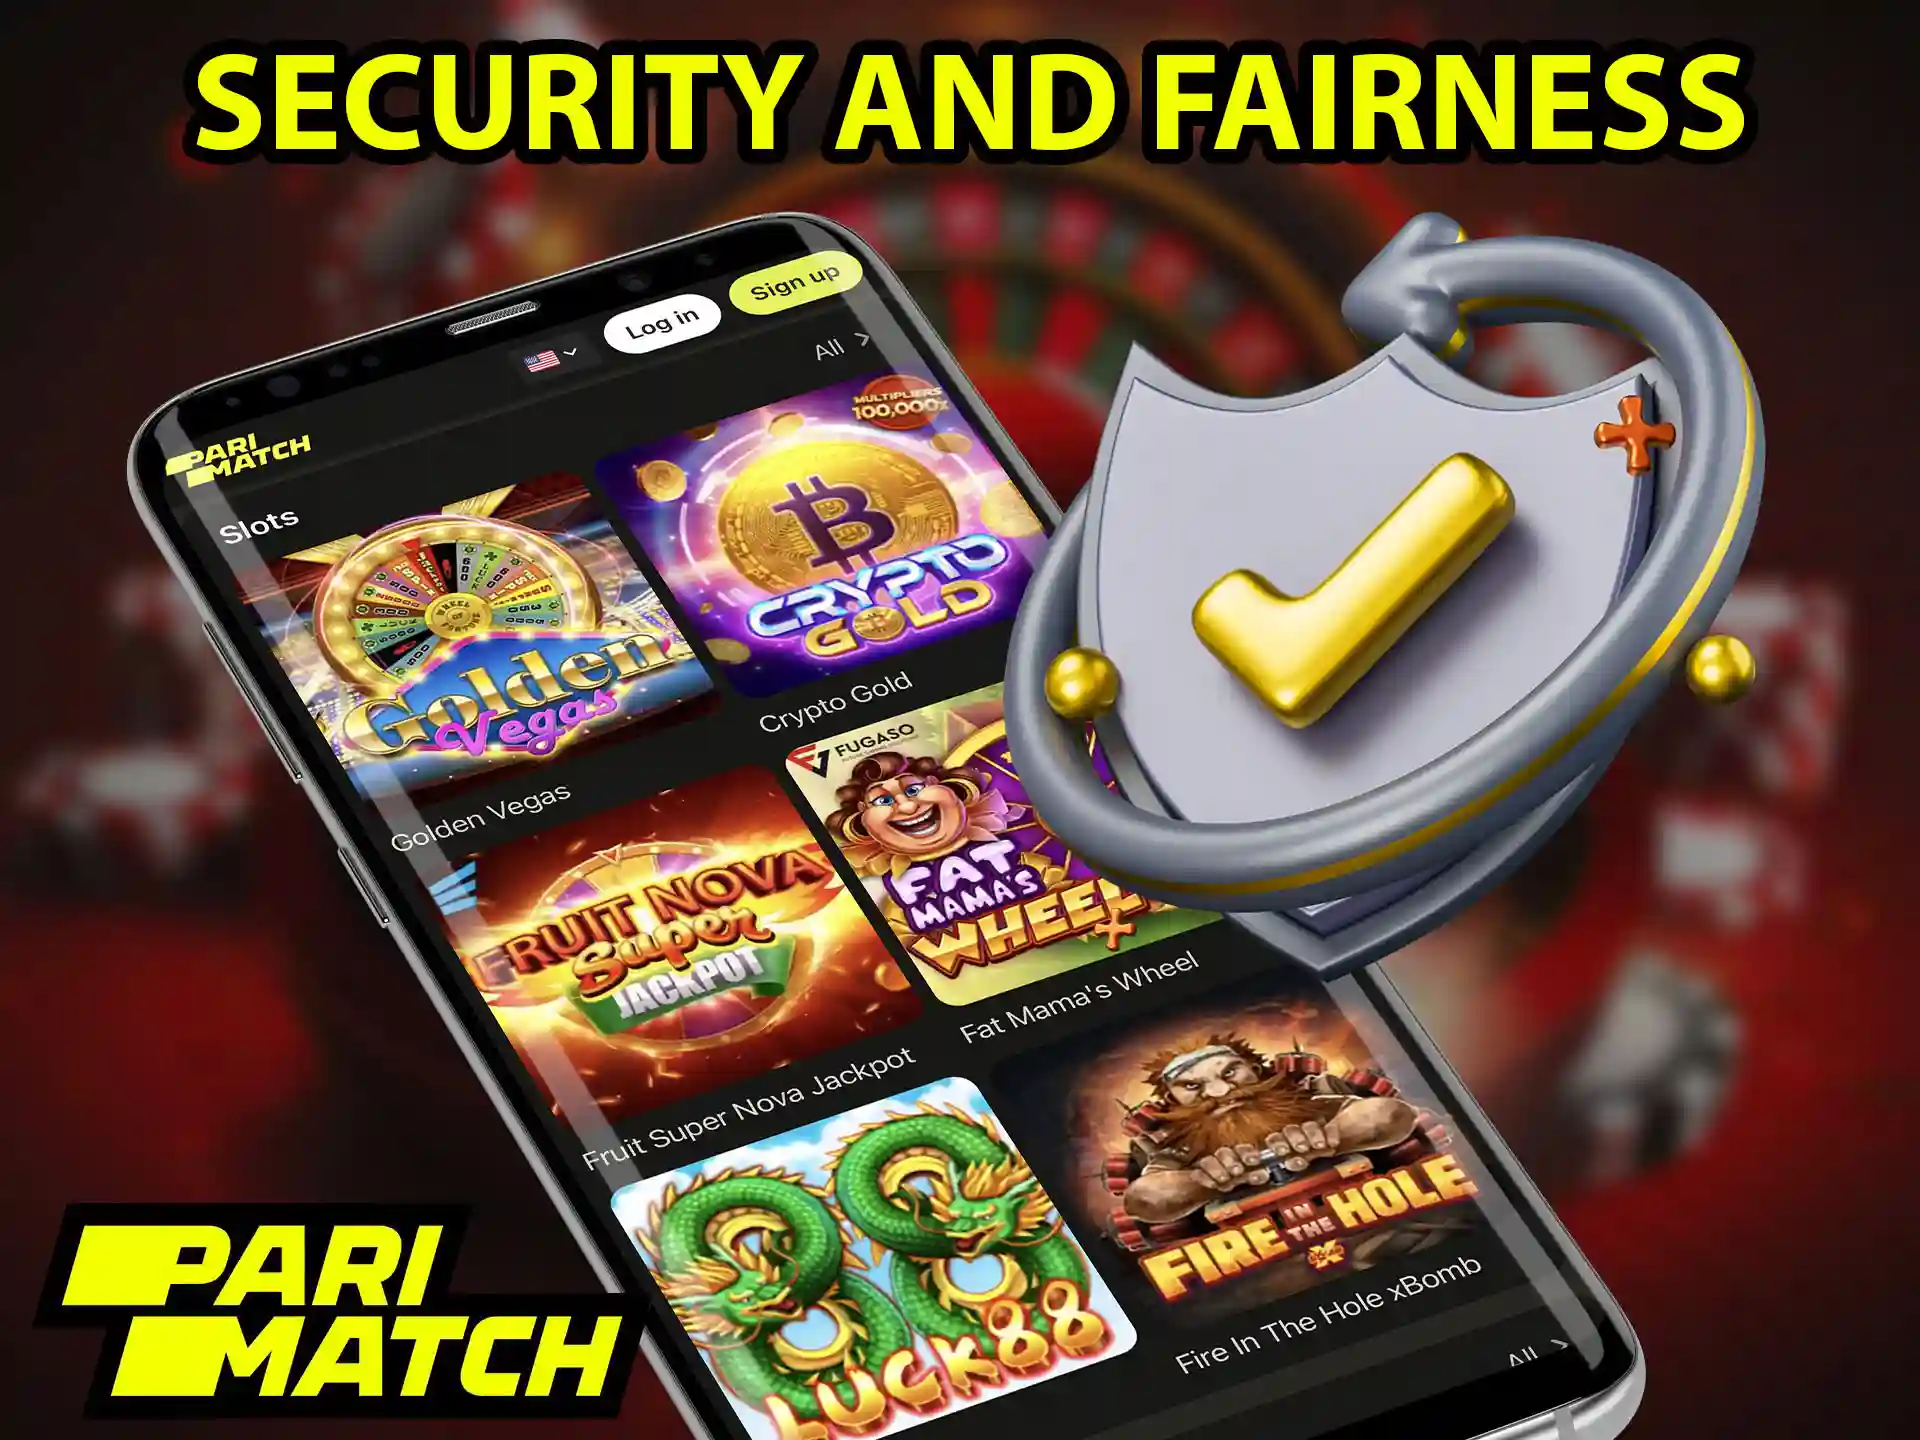 Parimatch uses a unique type of protection of games and data from external threats.